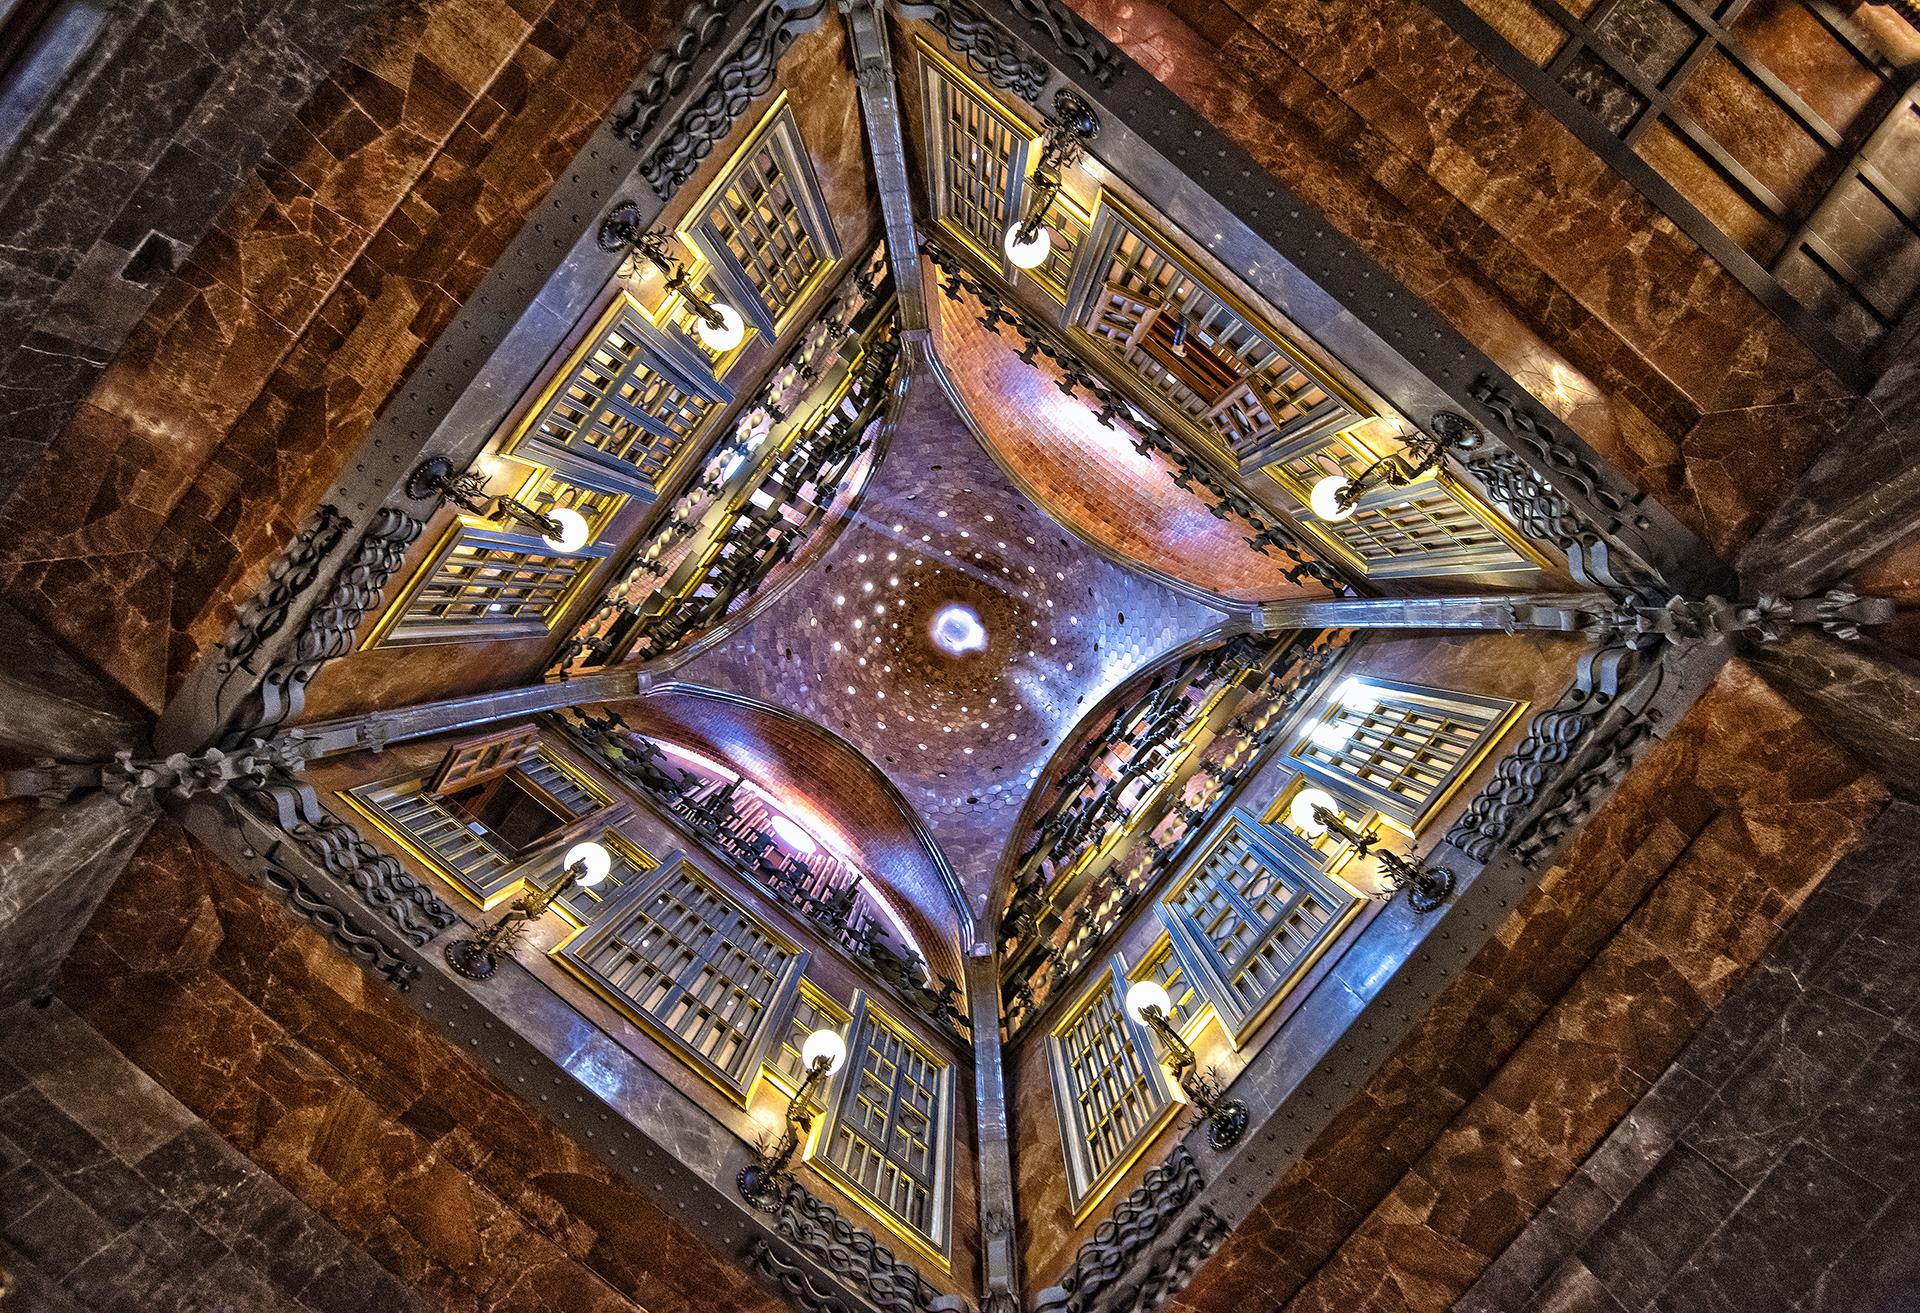 New York Photography Awards Winner - Ceiling, Palao Guell